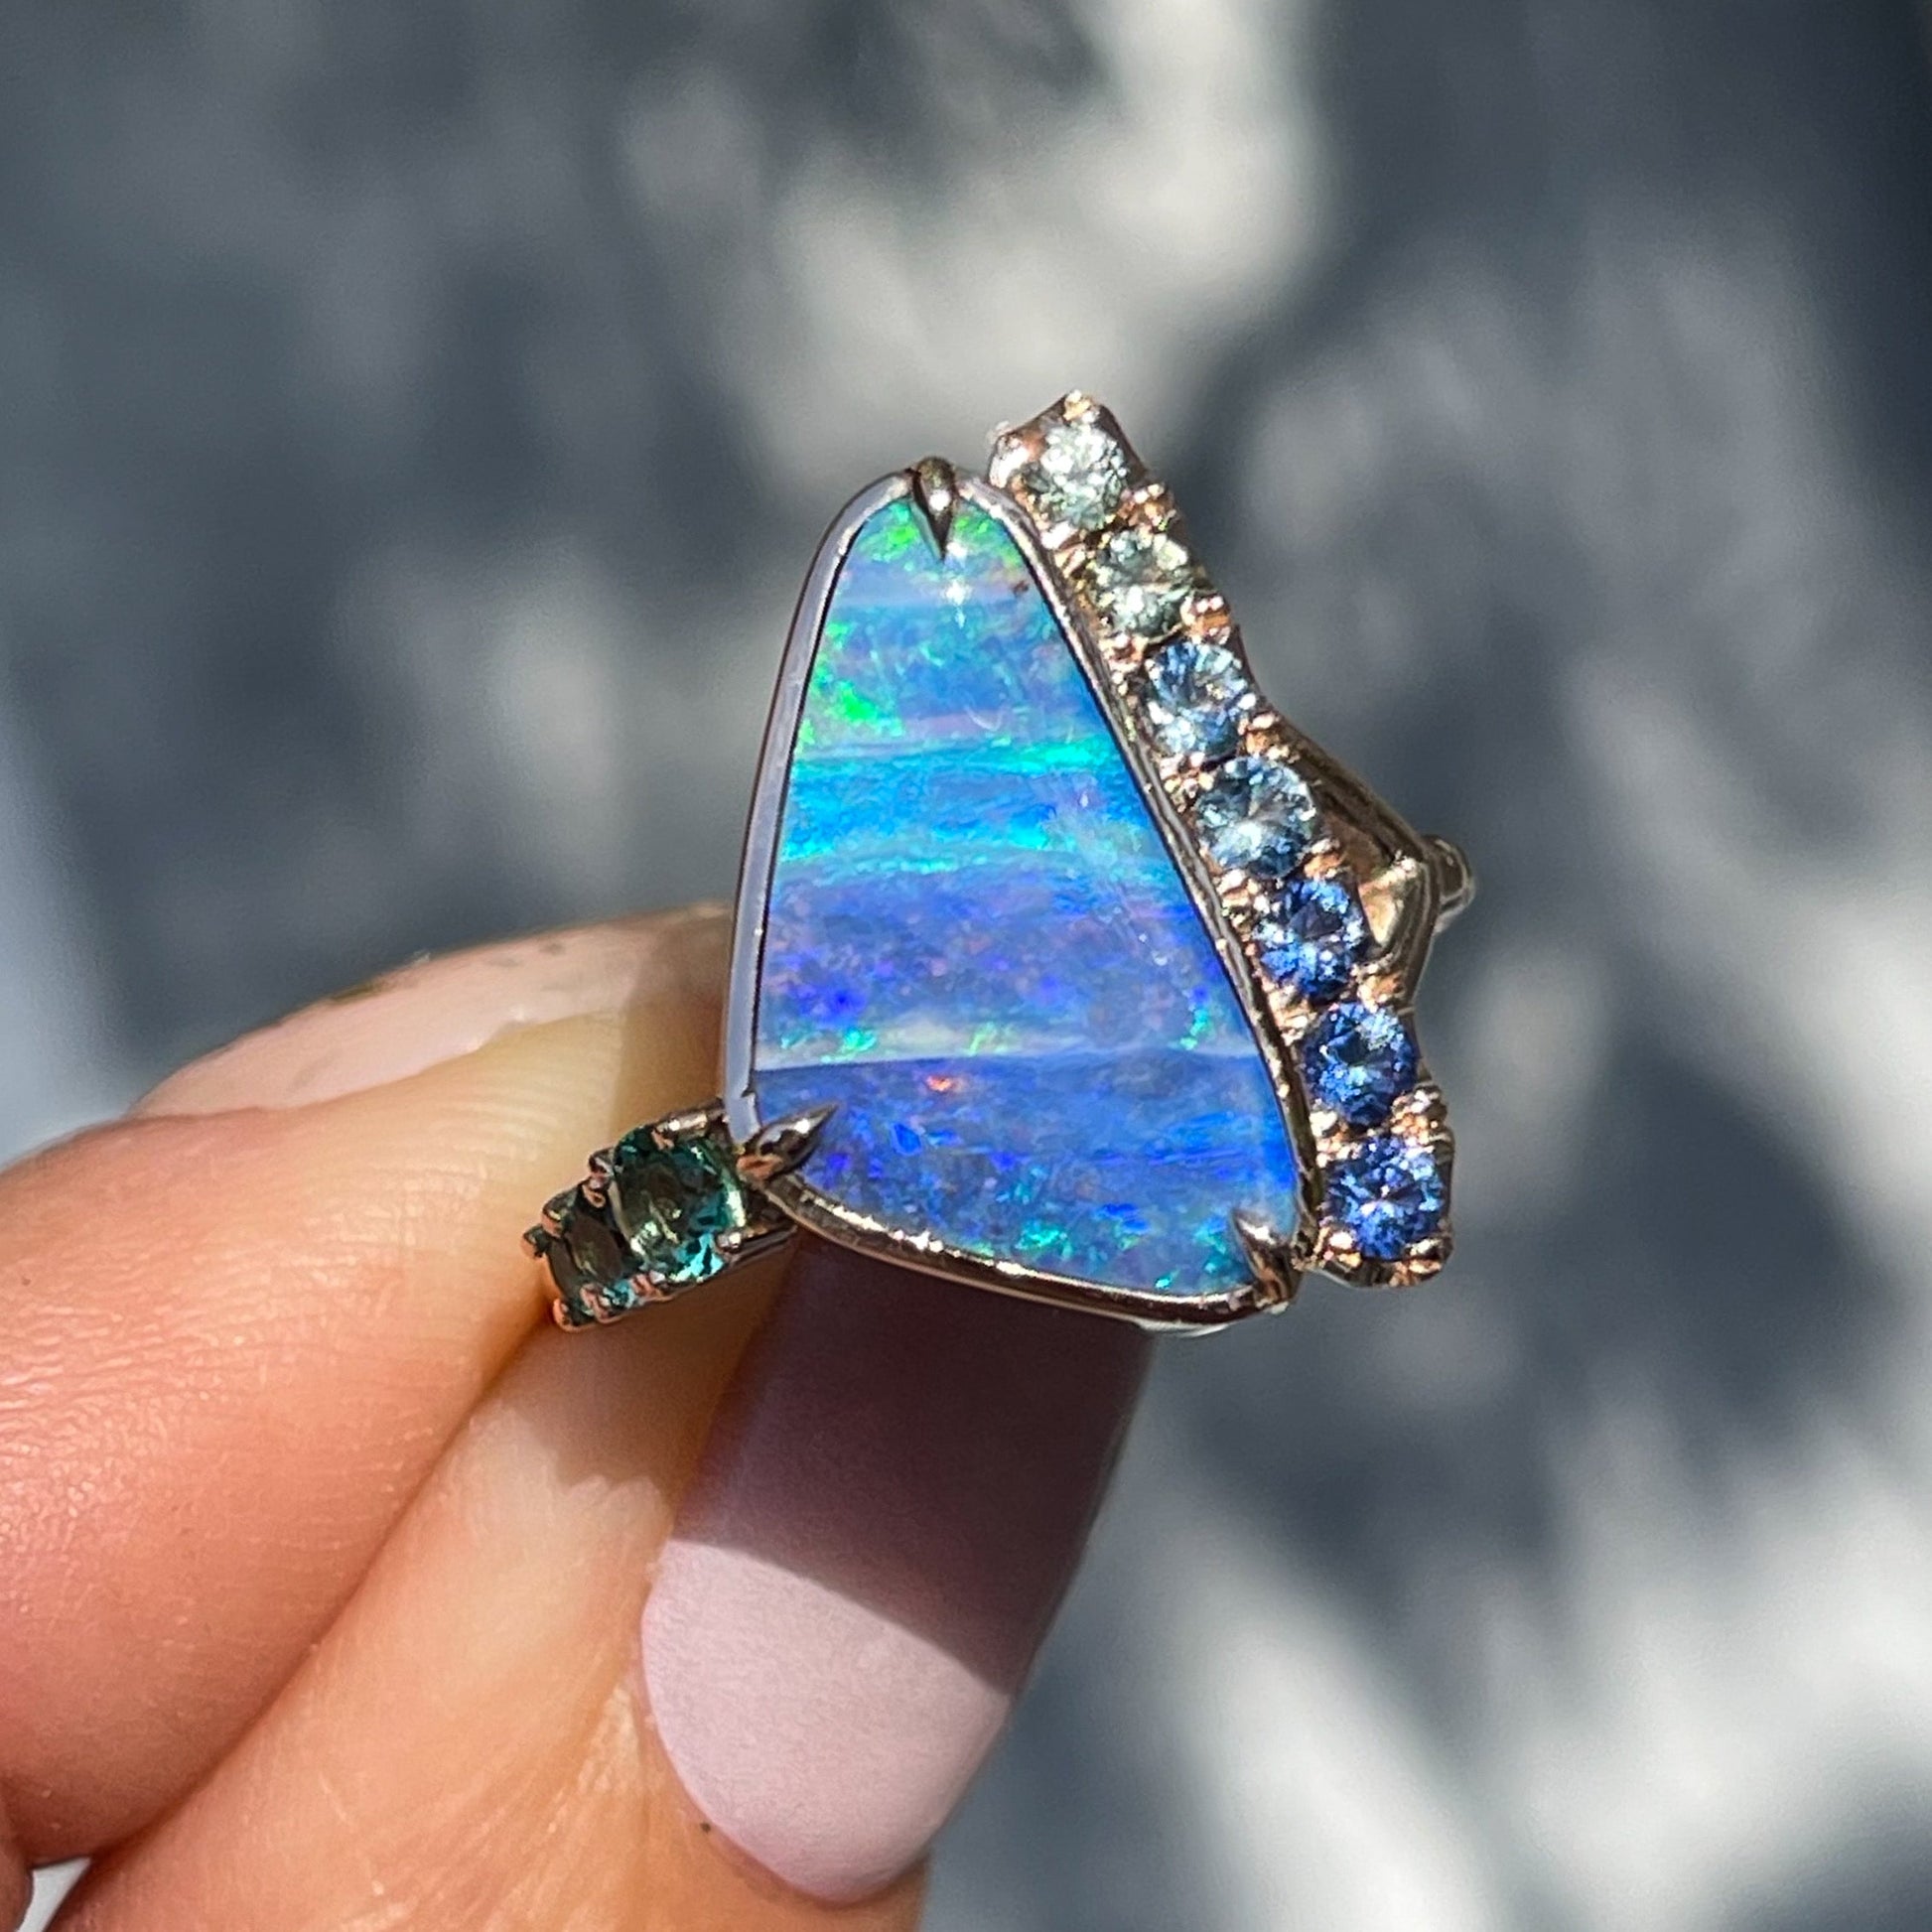 An Australian Opal Ring by NIXIN Jewelry. The opal and sapphire ring also has emeralds.